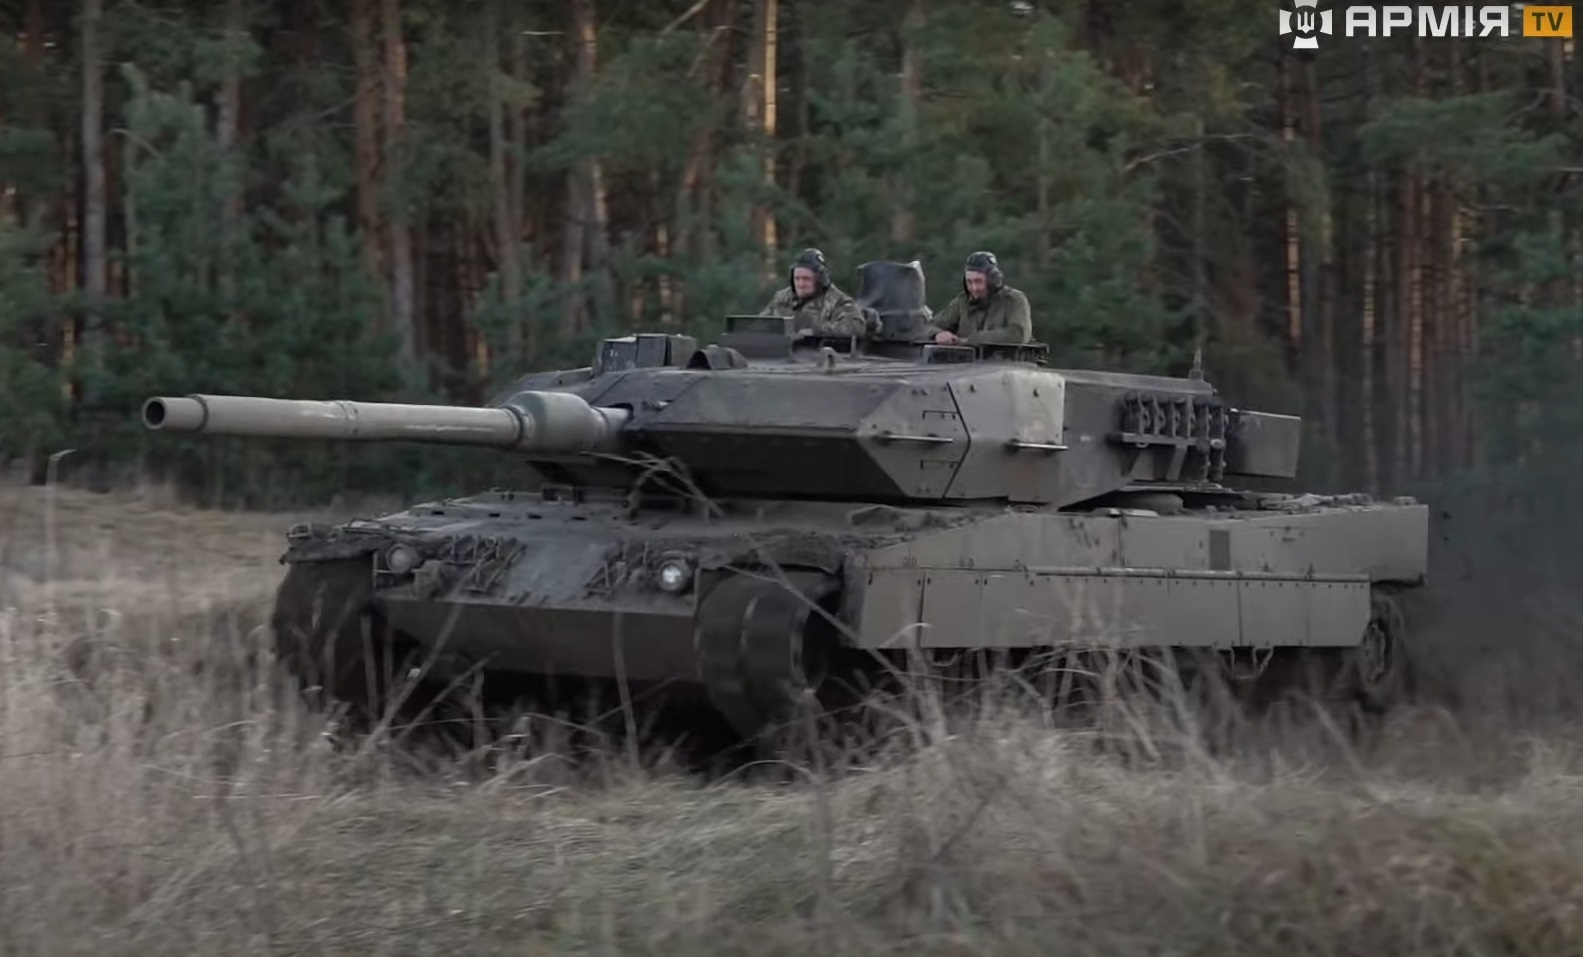 Leopard 2 tanks: what are they and why does Ukraine want them?, Ukraine